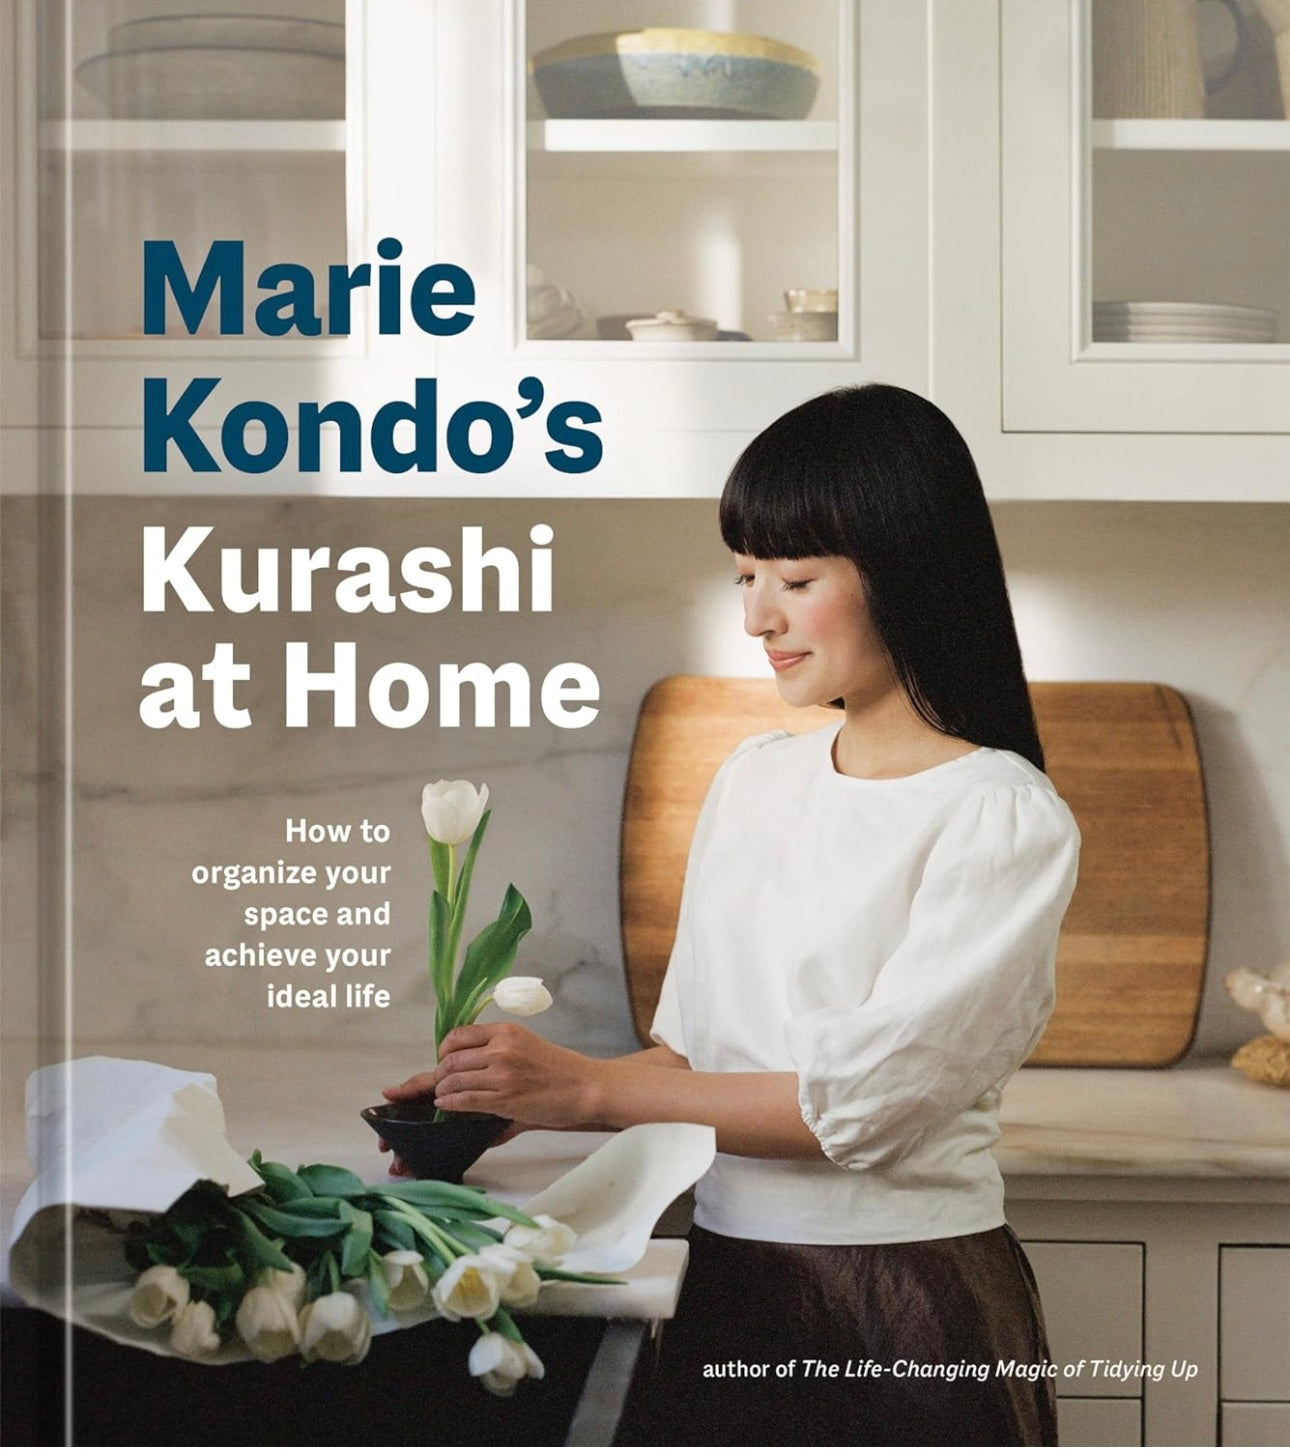 Marie Kondo's Kurashi at Home: How to Organize your Space and Achieve your Ideal Life Hardcover